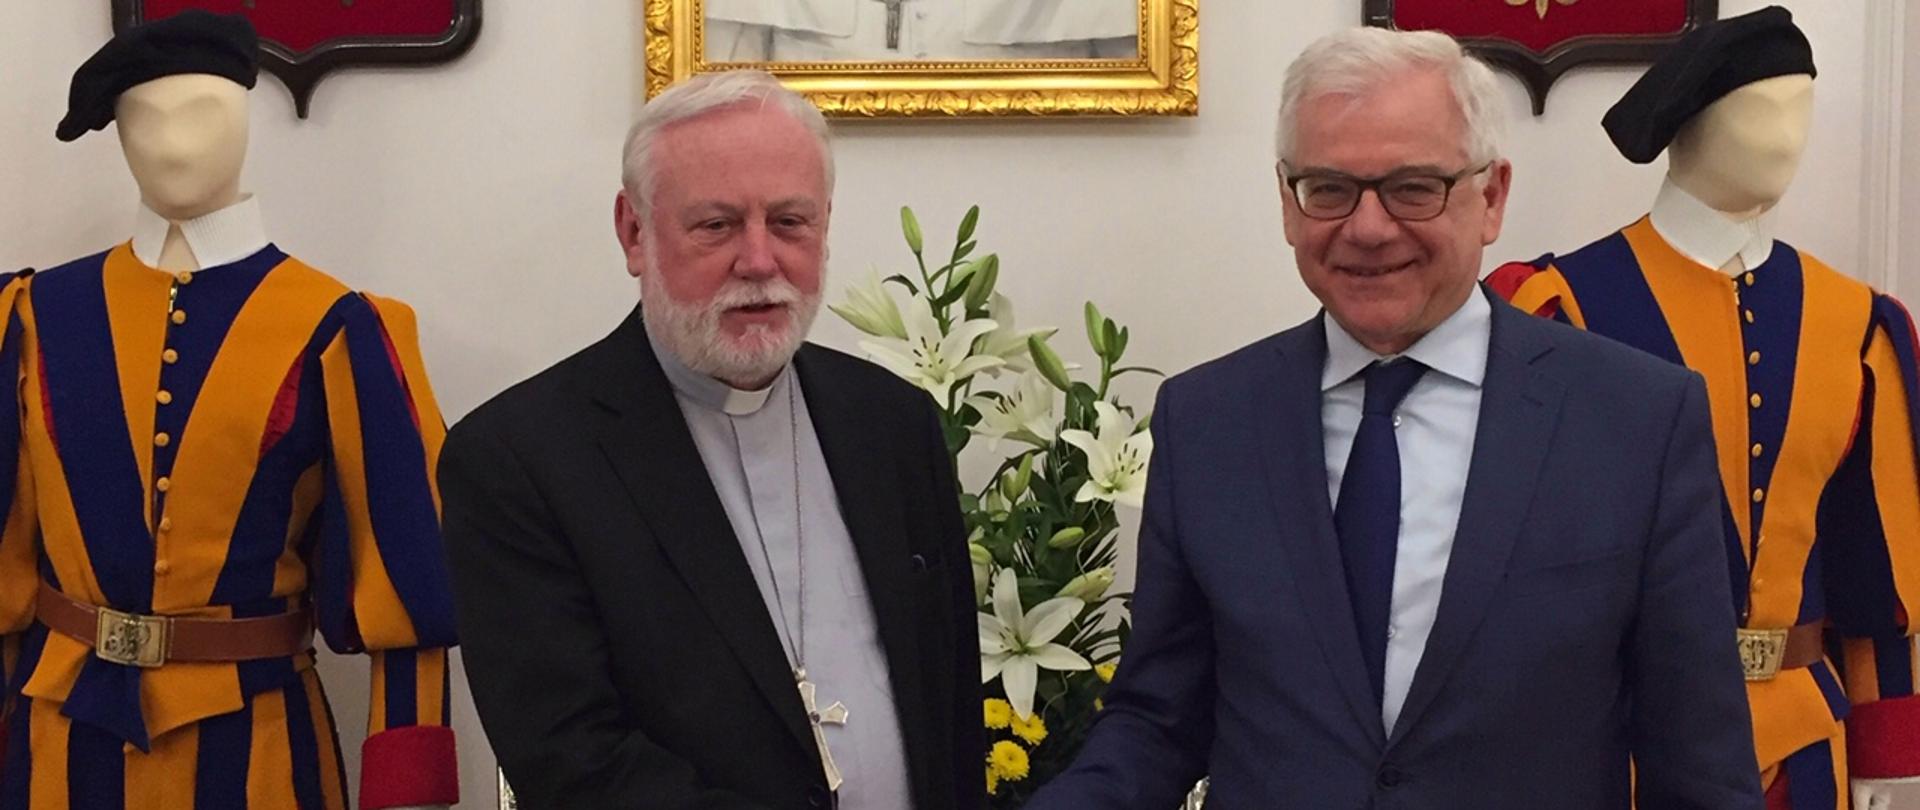 Archbishop Paul Gallagher, Secretary for Relations with States in the Secretariat of State of the Holy See, visits Poland